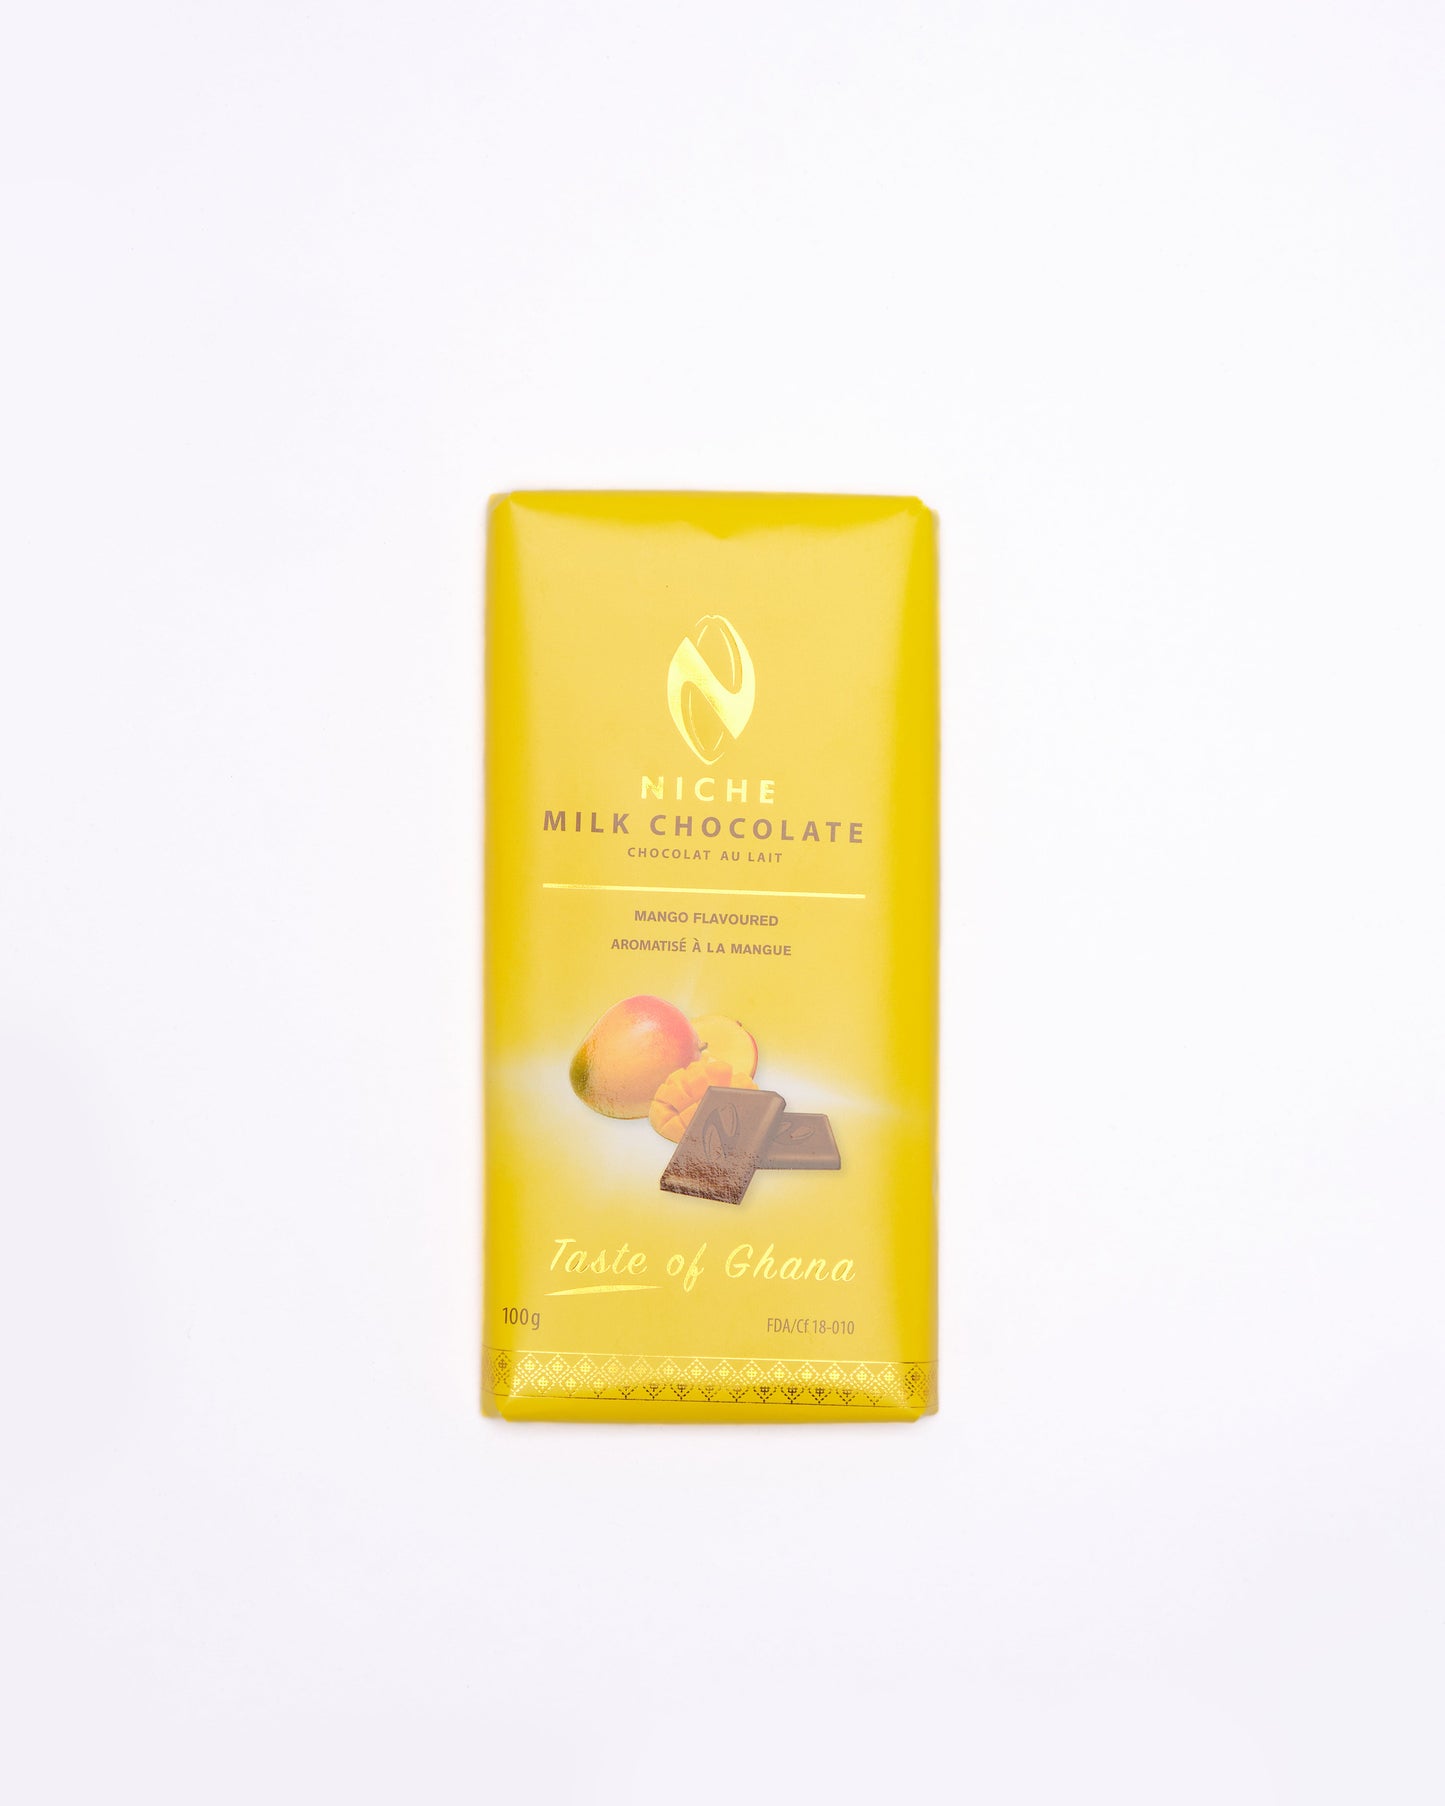 Niche Chocolate with varieties of flavours